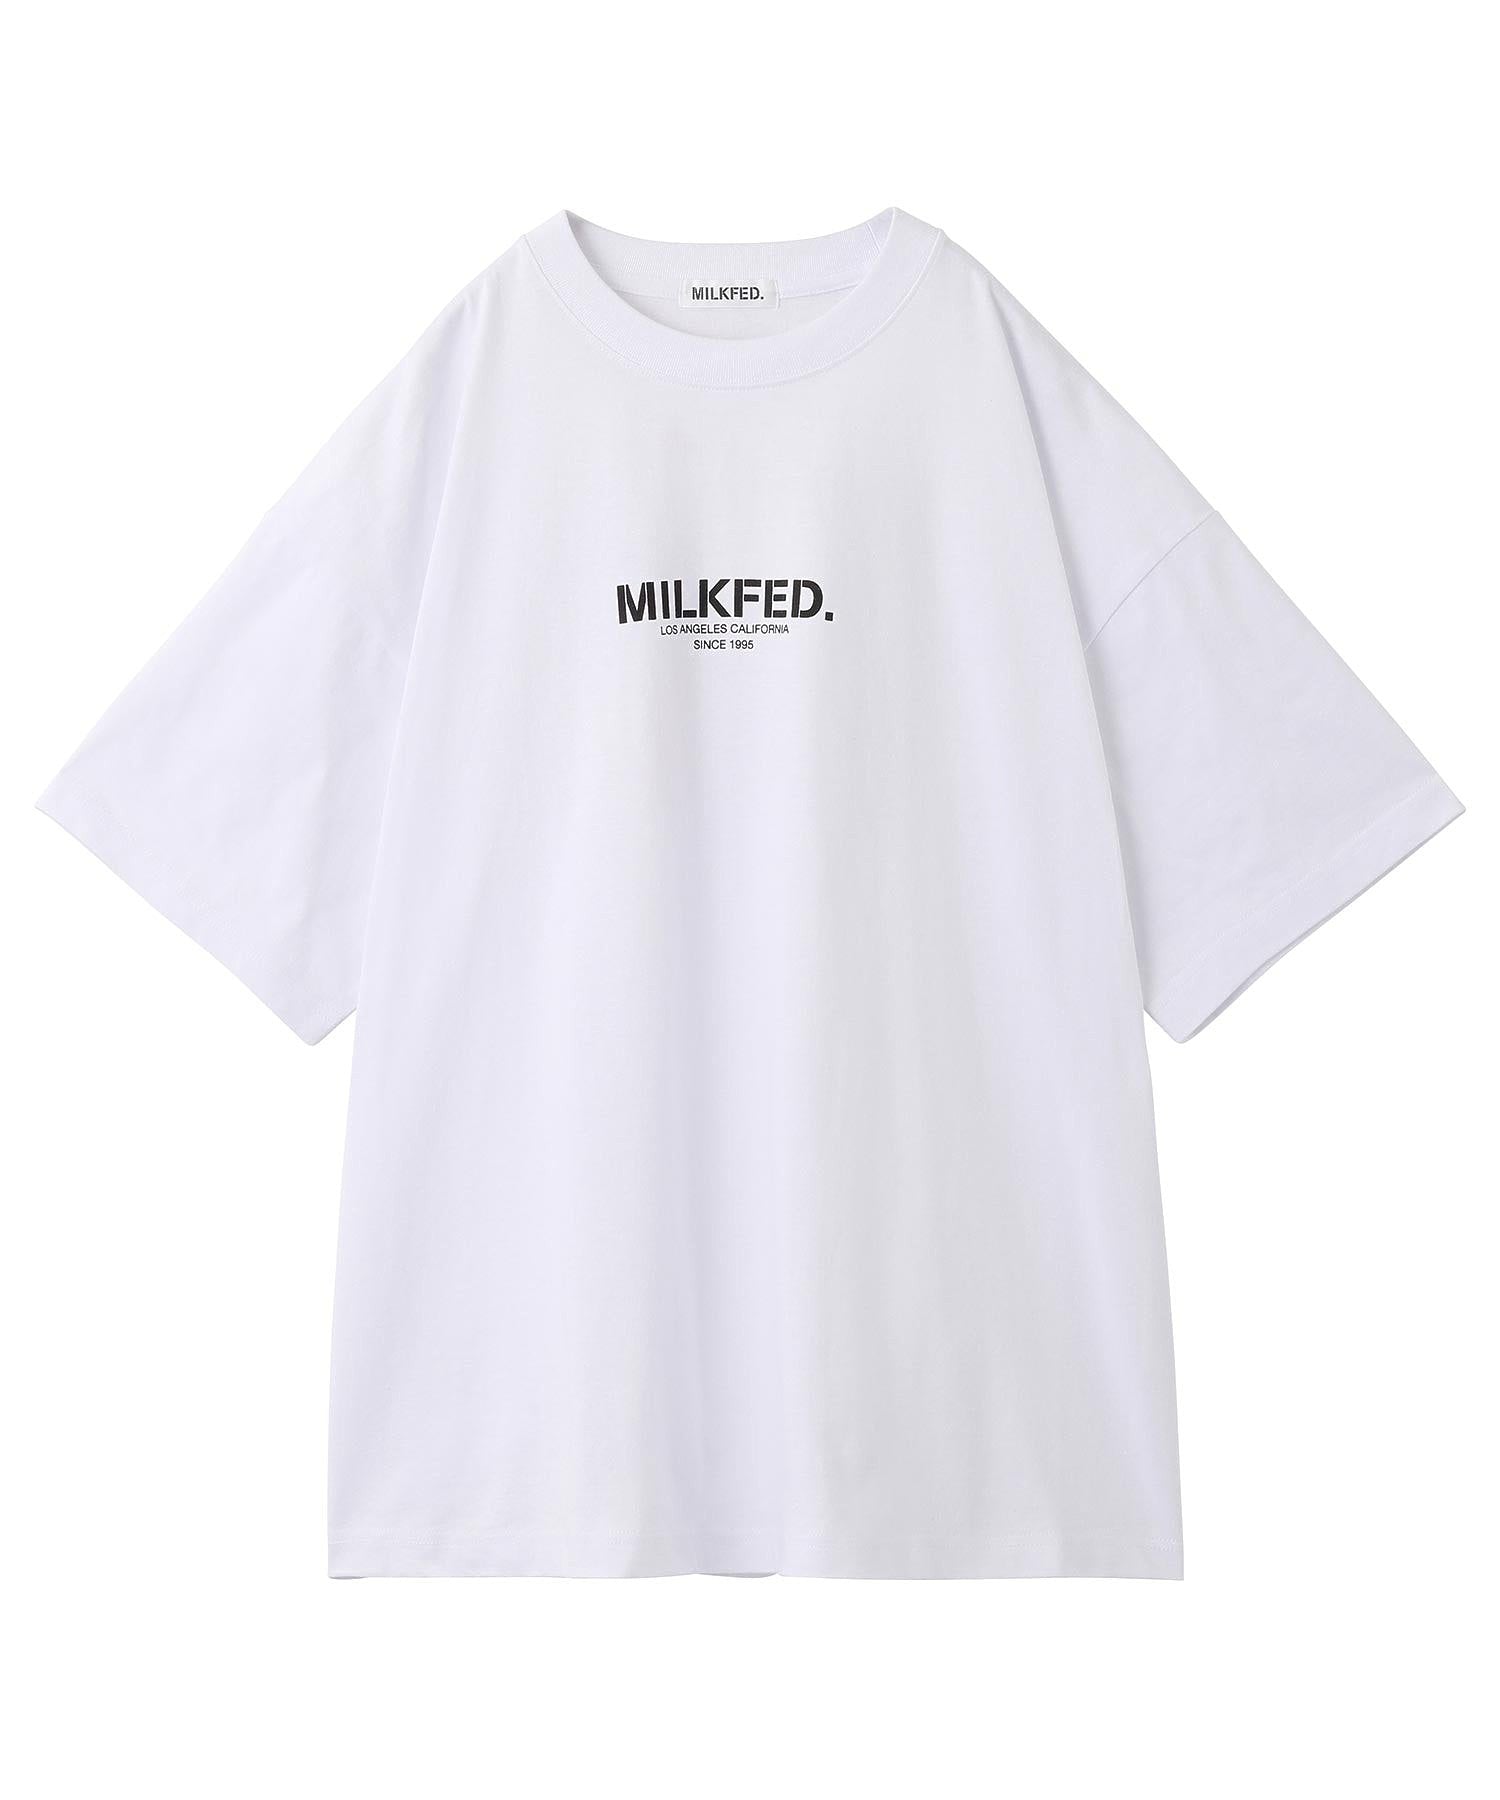 LINES AND CIRCLES WIDE S/S TEE MILKFED.